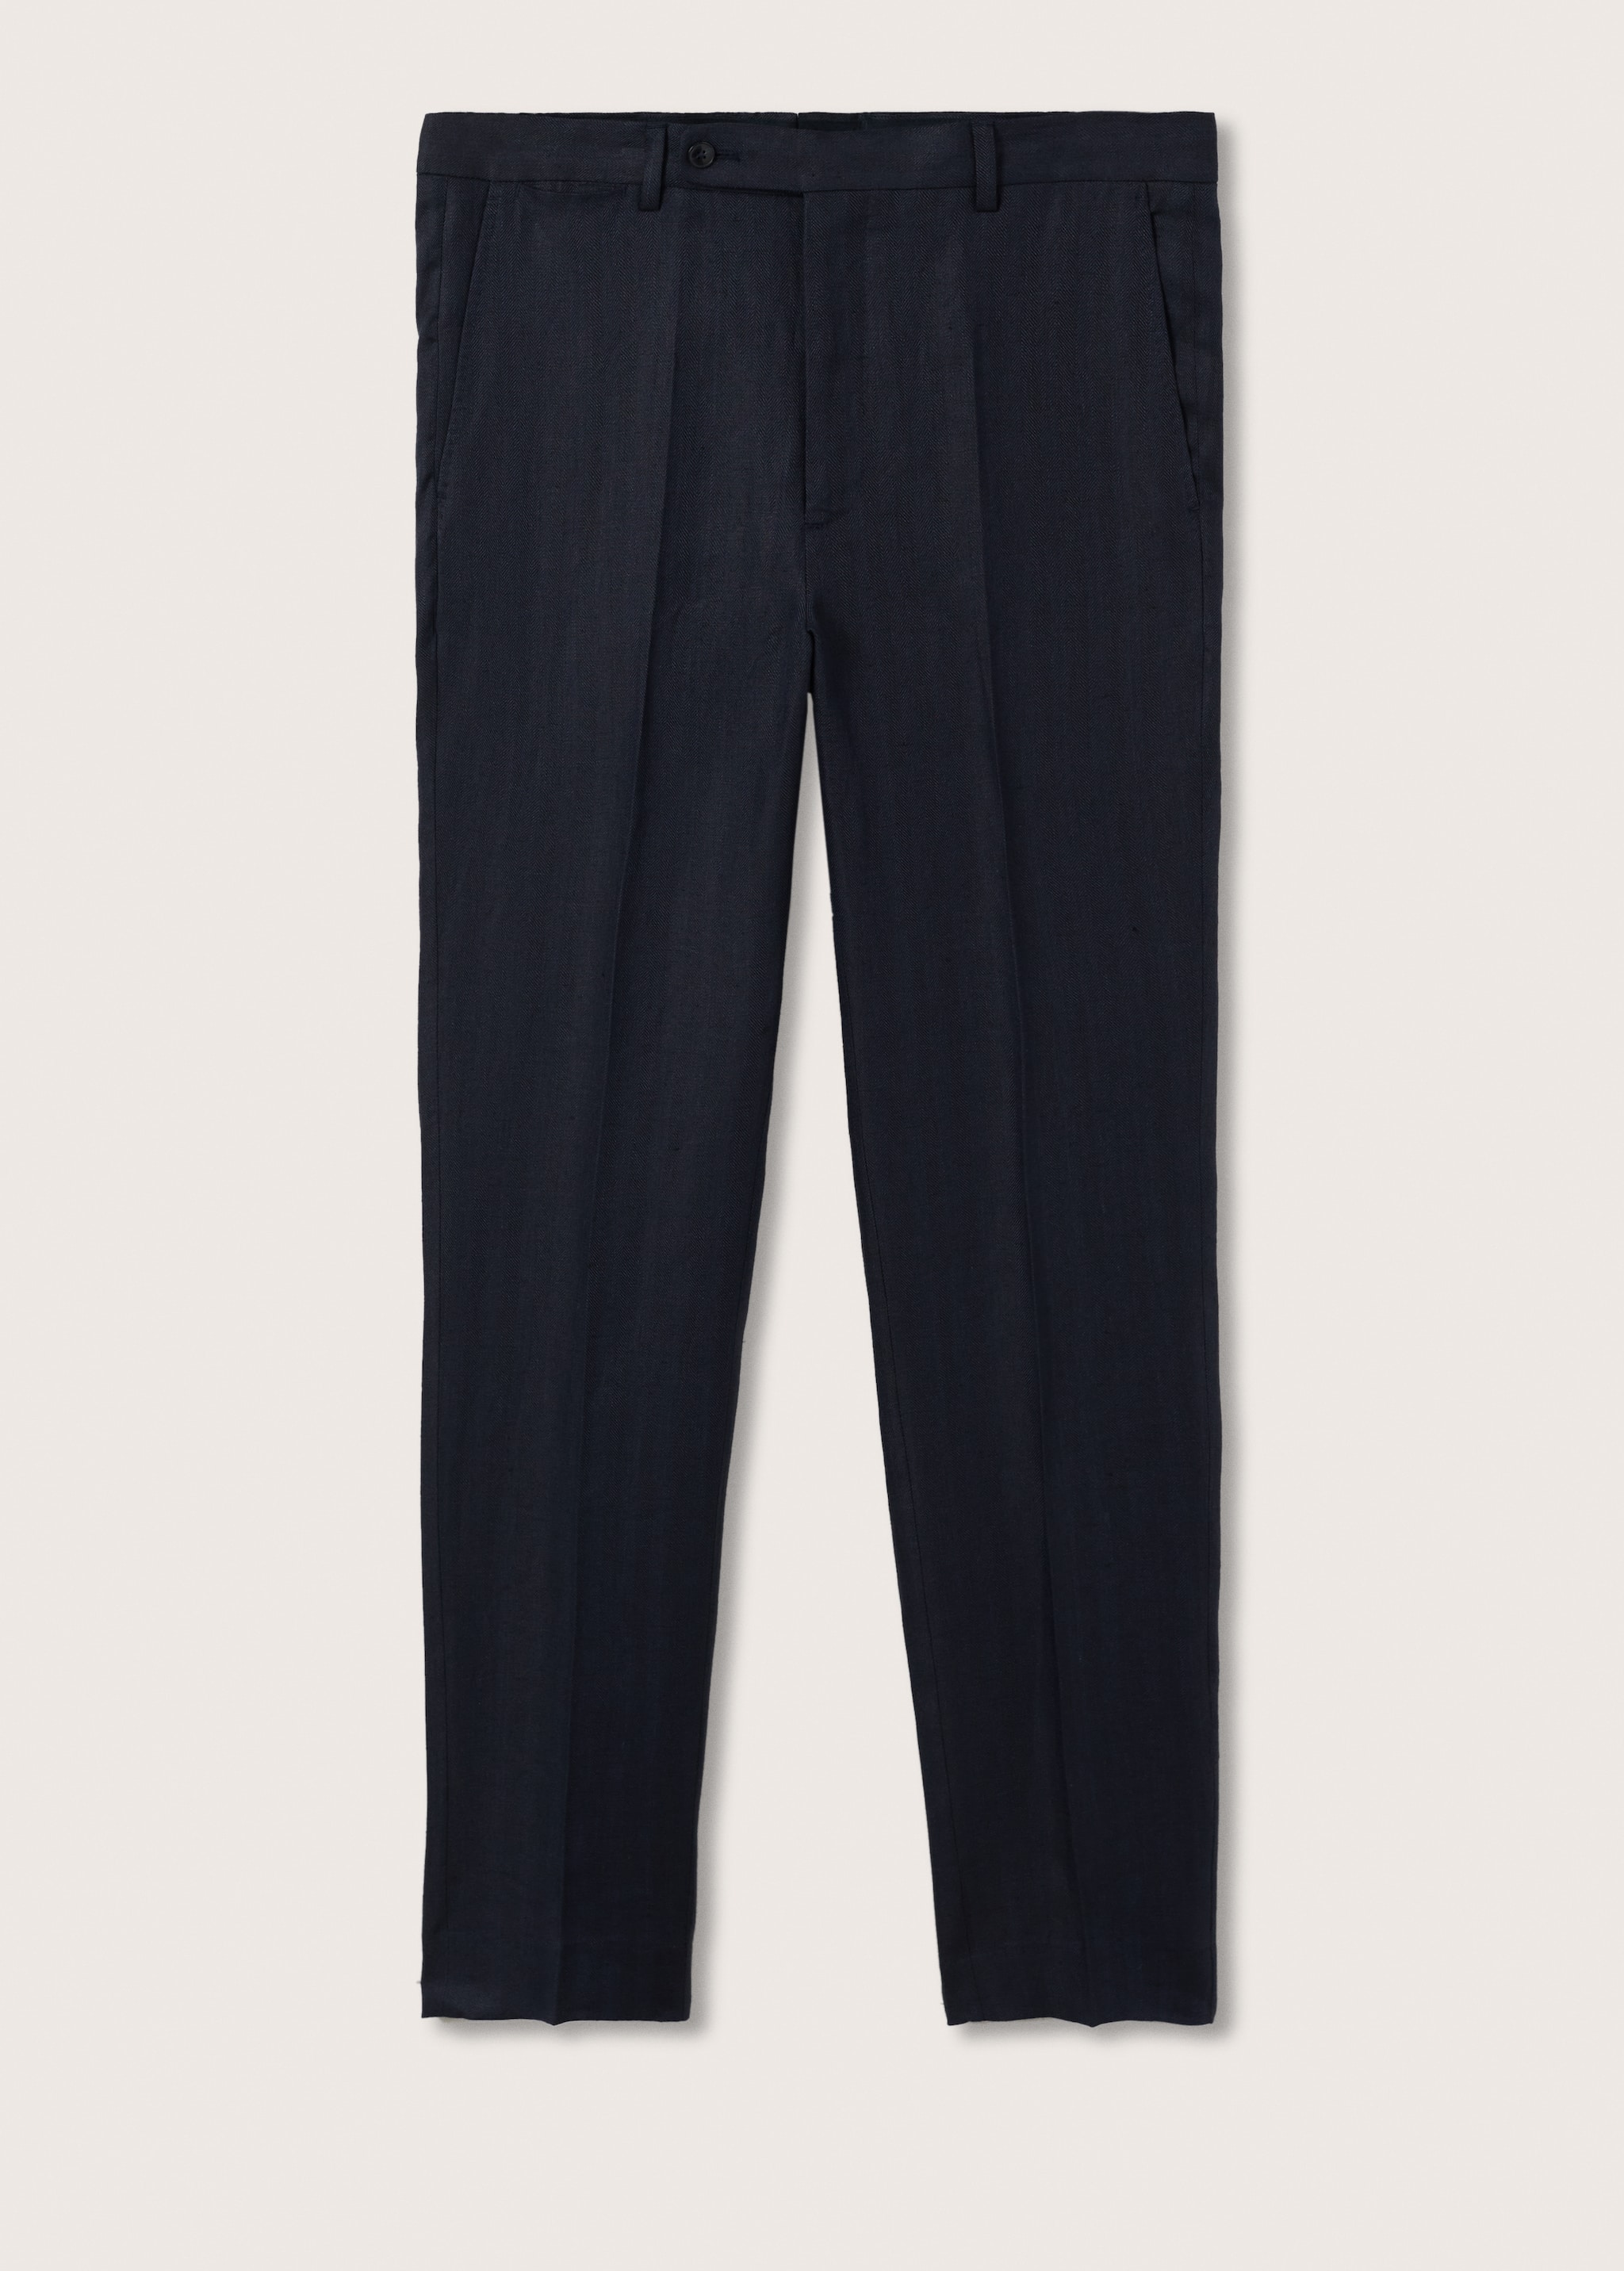  Linen suit trousers - Article without model